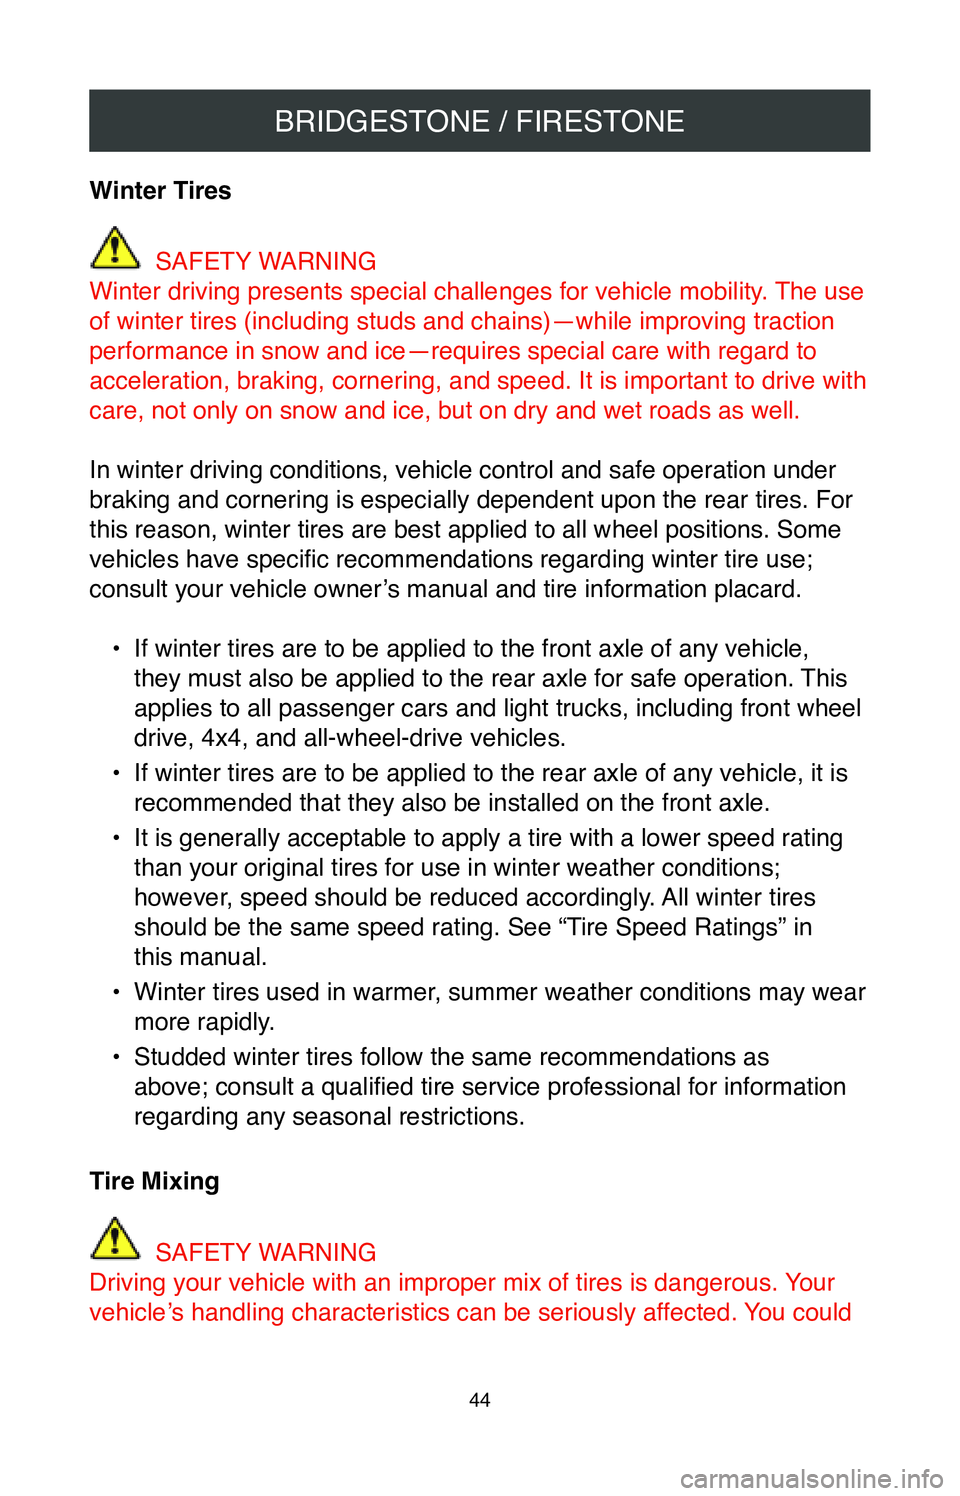 TOYOTA CAMRY 2020  Warranties & Maintenance Guides (in English) BRIDGESTONE / FIRESTONE
44
Winter Tires 
 SAFETY WARNING
Winter driving presents special challenges for vehicle mobility. The use 
of winter tires (including studs and chains)—while improving tracti